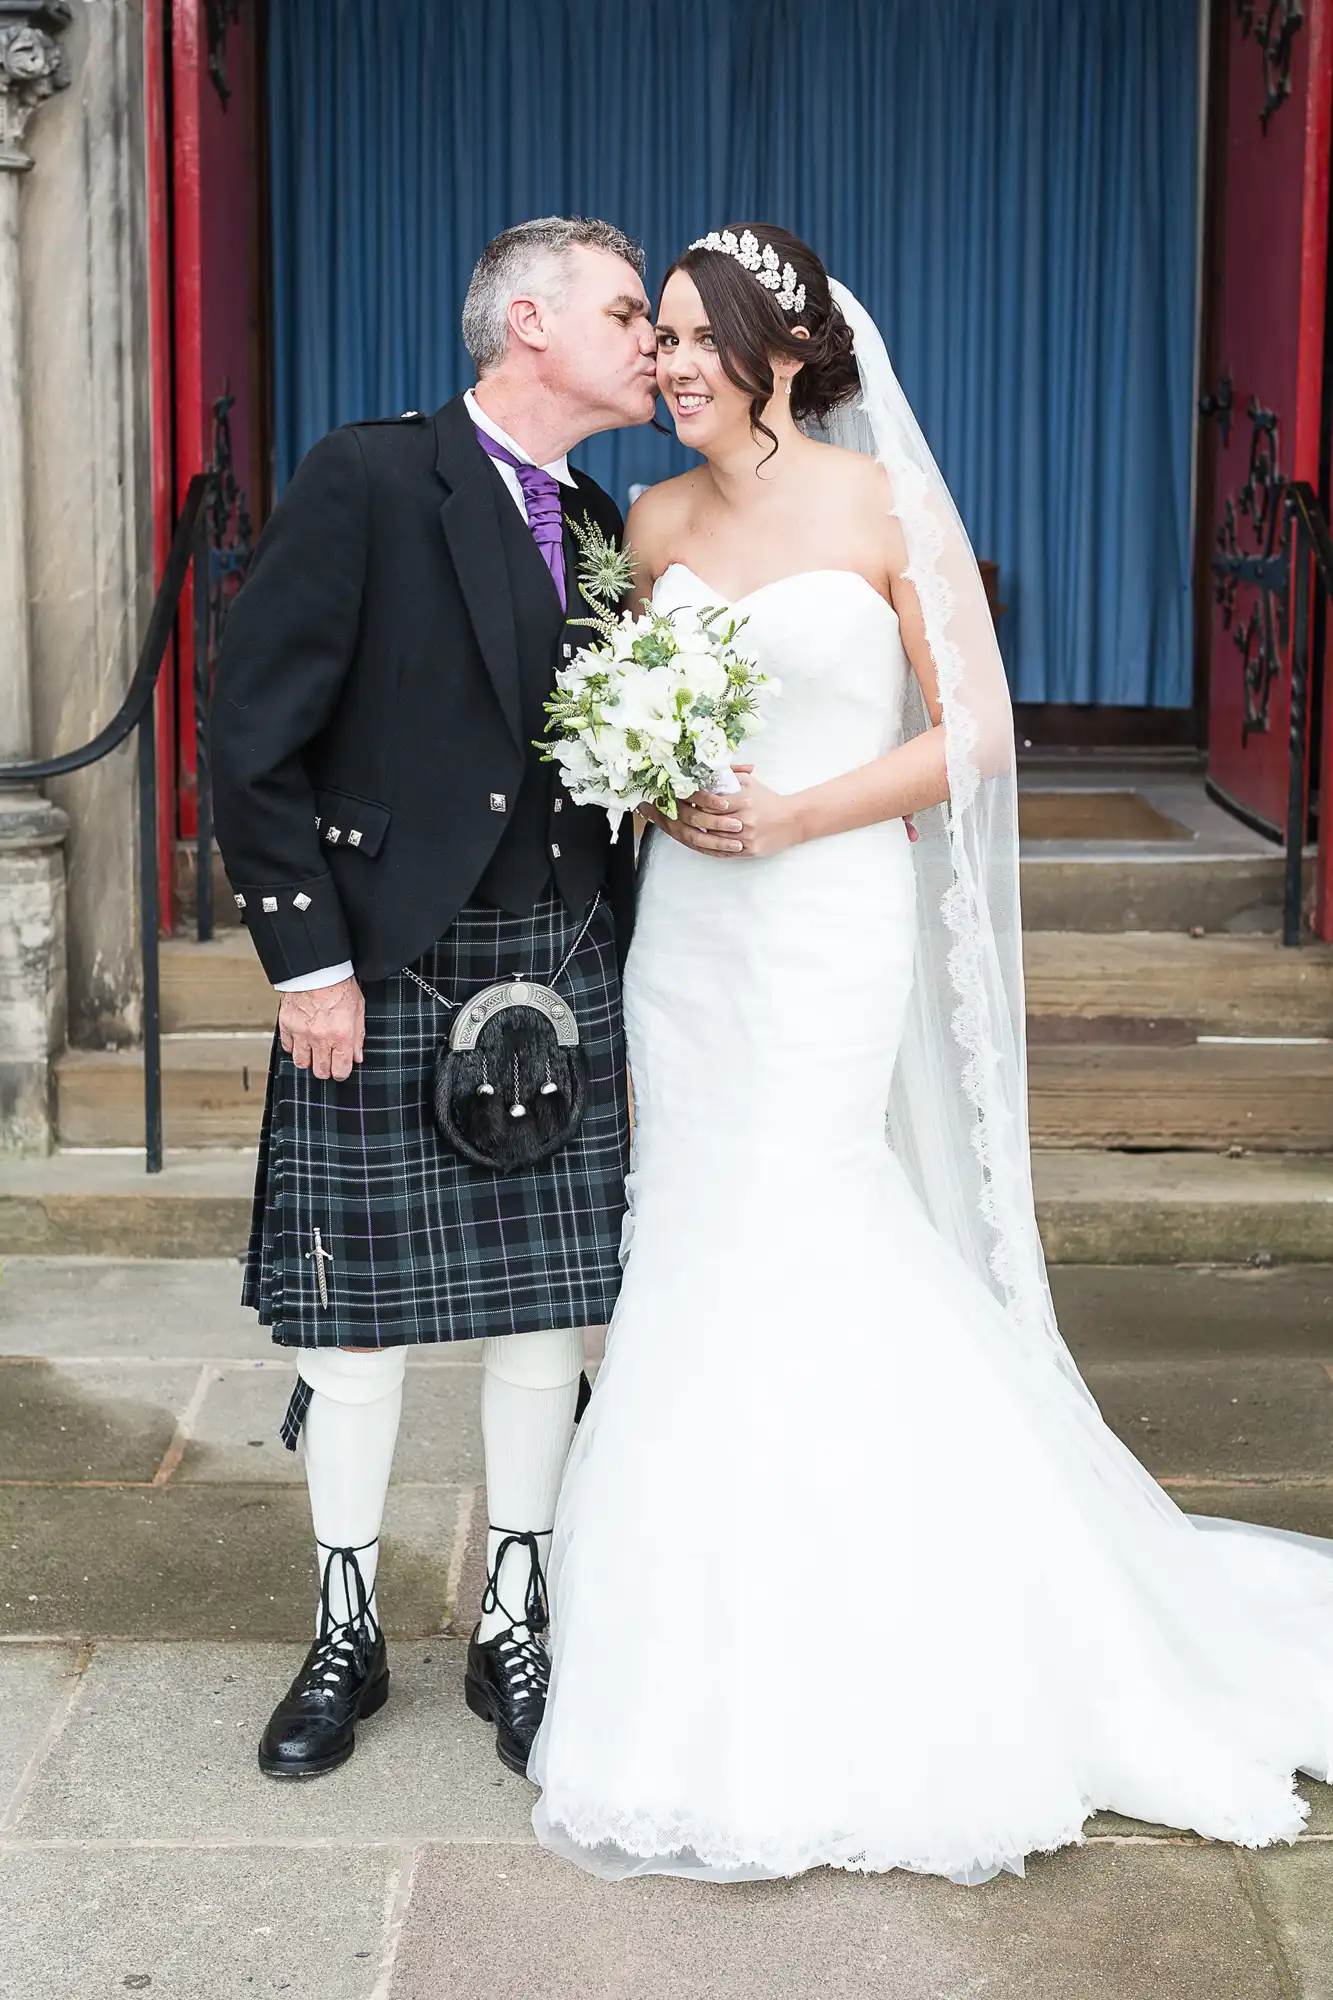 A groom in a kilt kisses the bride on the cheek outside a church; she is in a white gown and holding a bouquet.